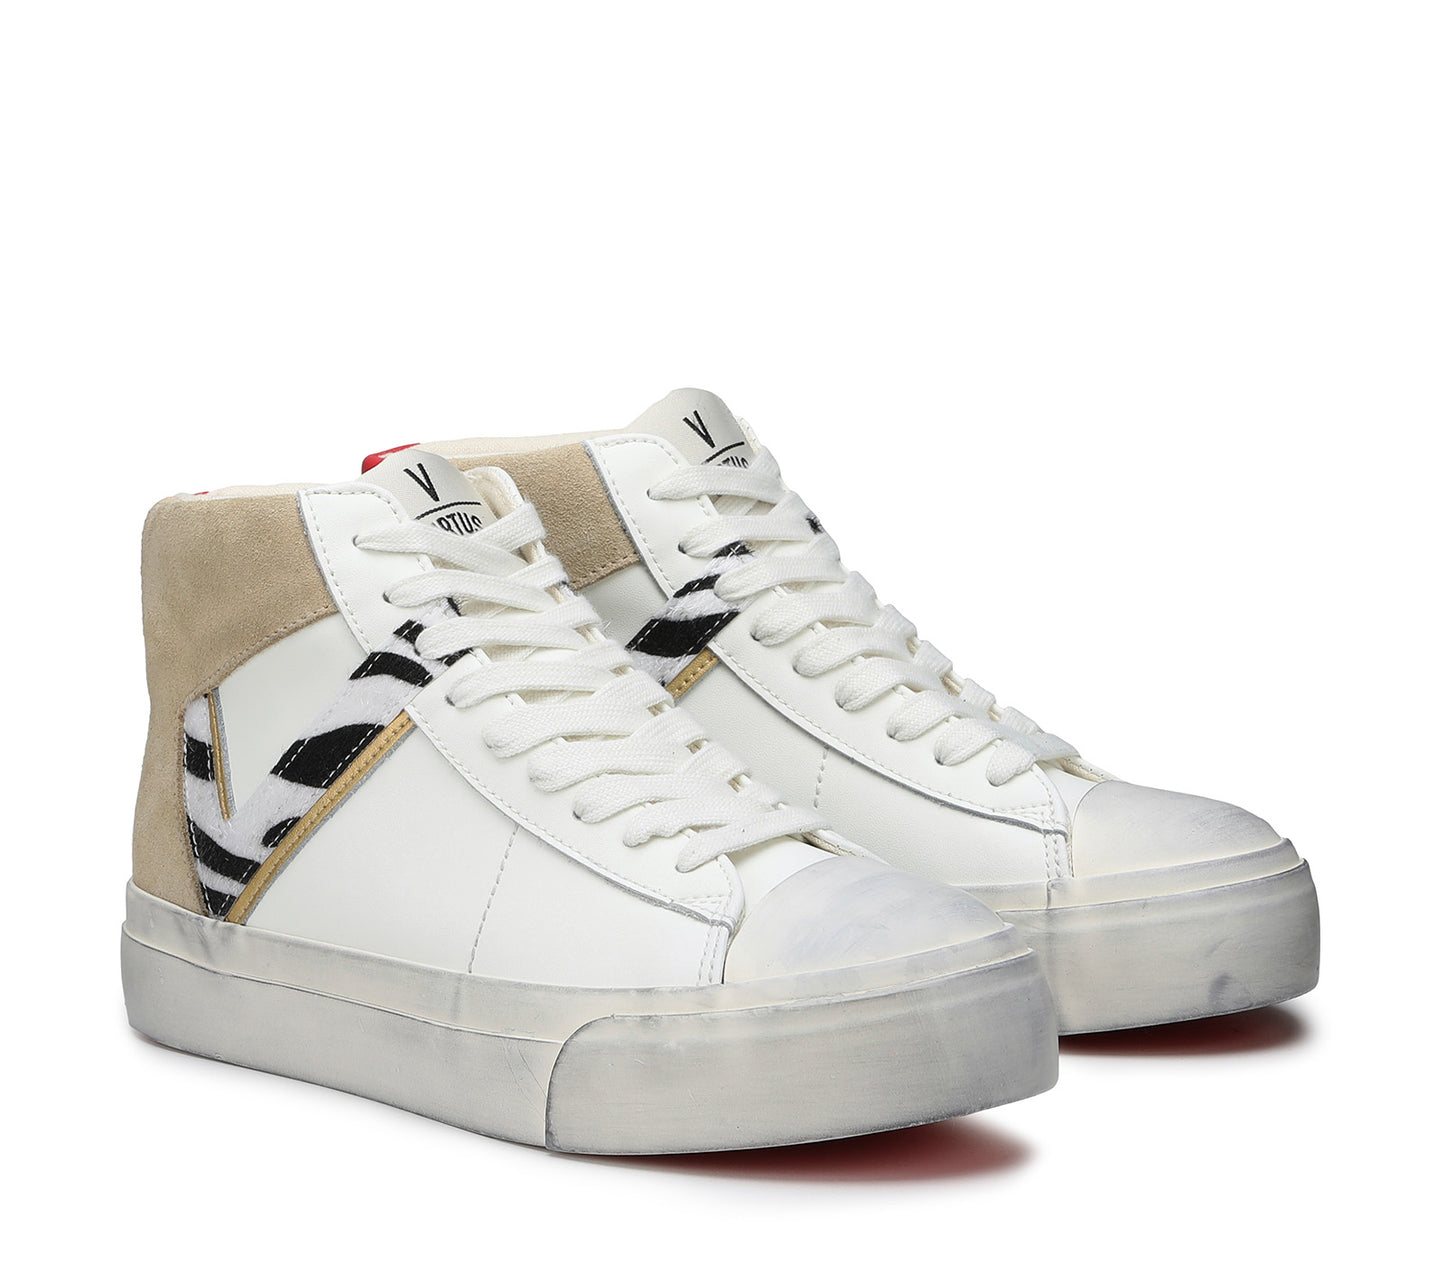 Rubby Mid Leather/suede off white/sand-zebra